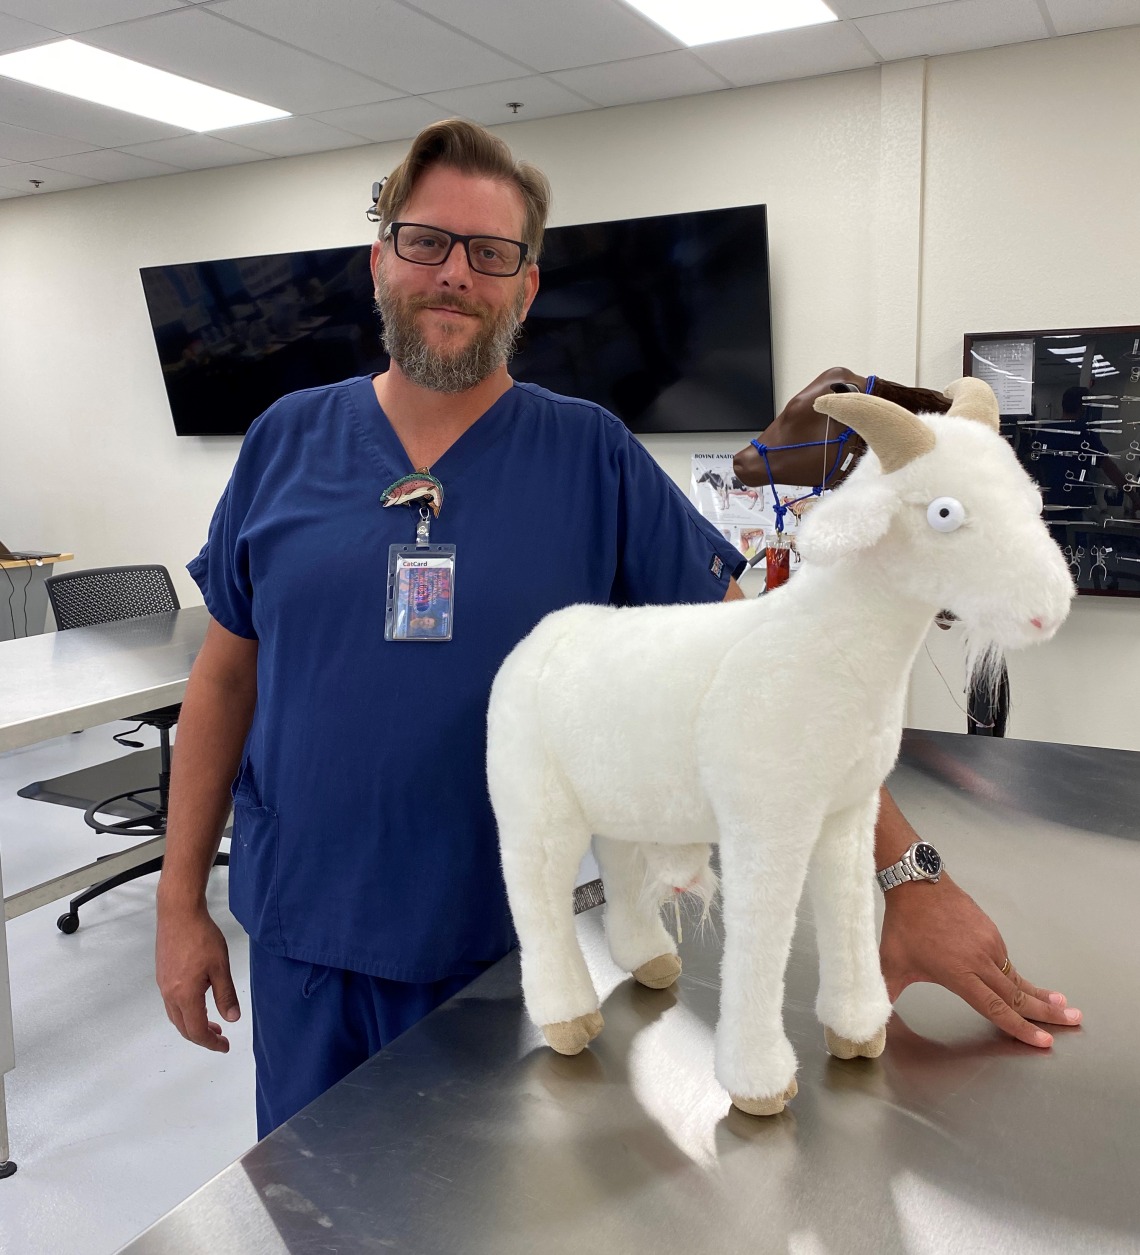 Vet tech Joseph Scarber stands with a model of a goat on an exam table.